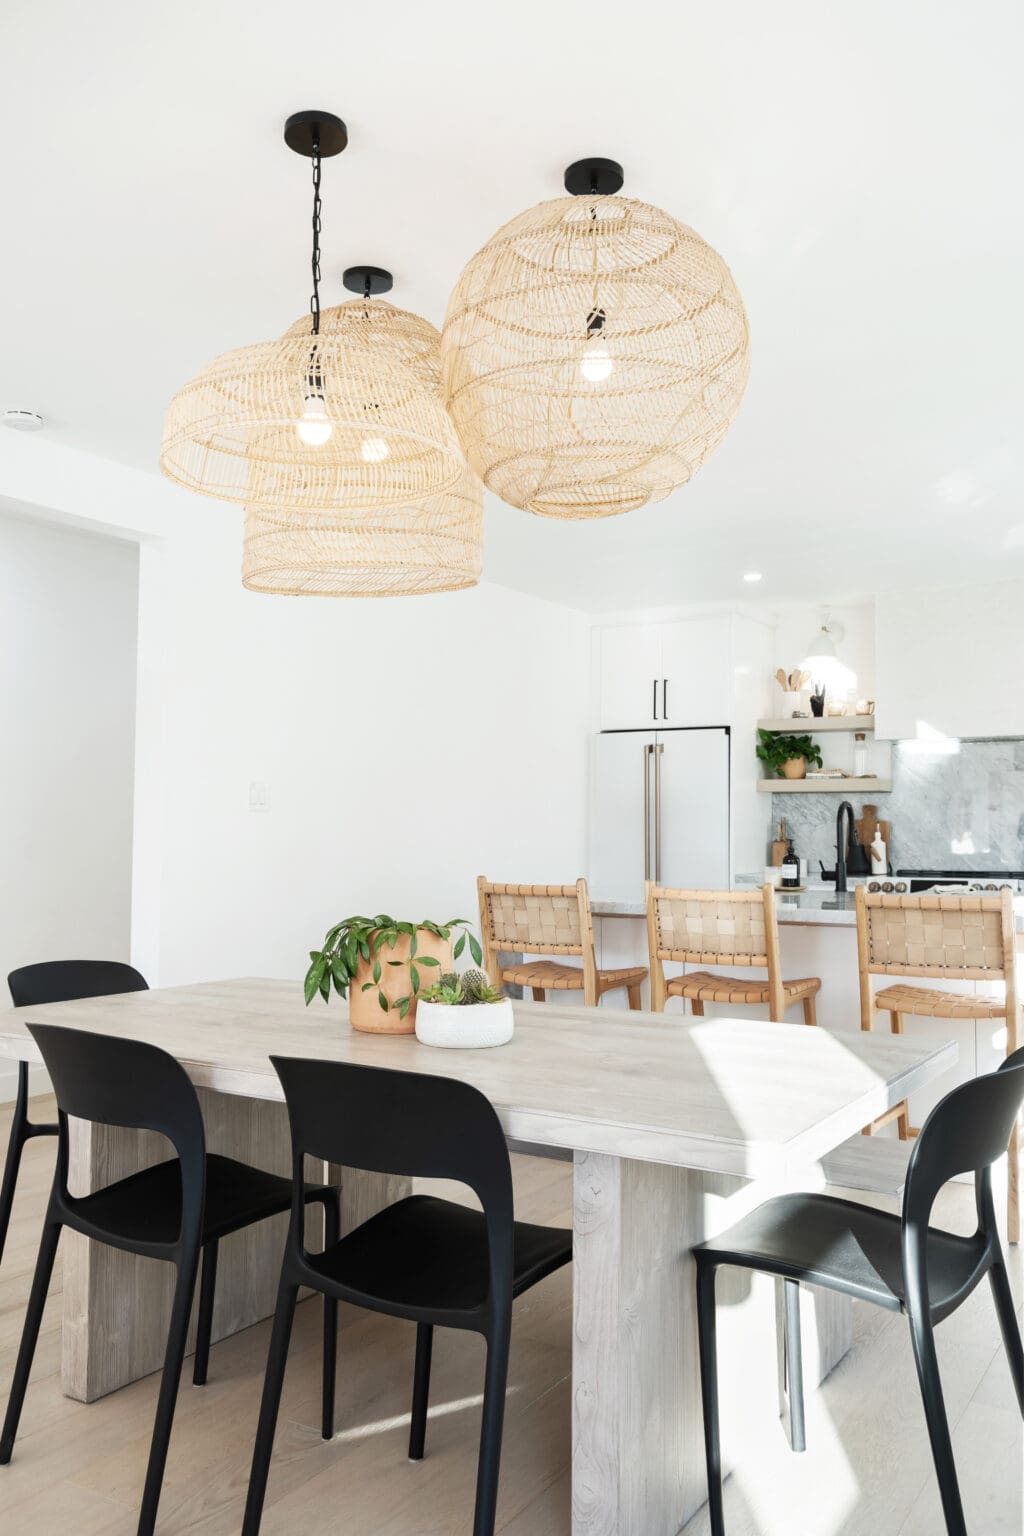 A dining room with a woven basket chandelier 